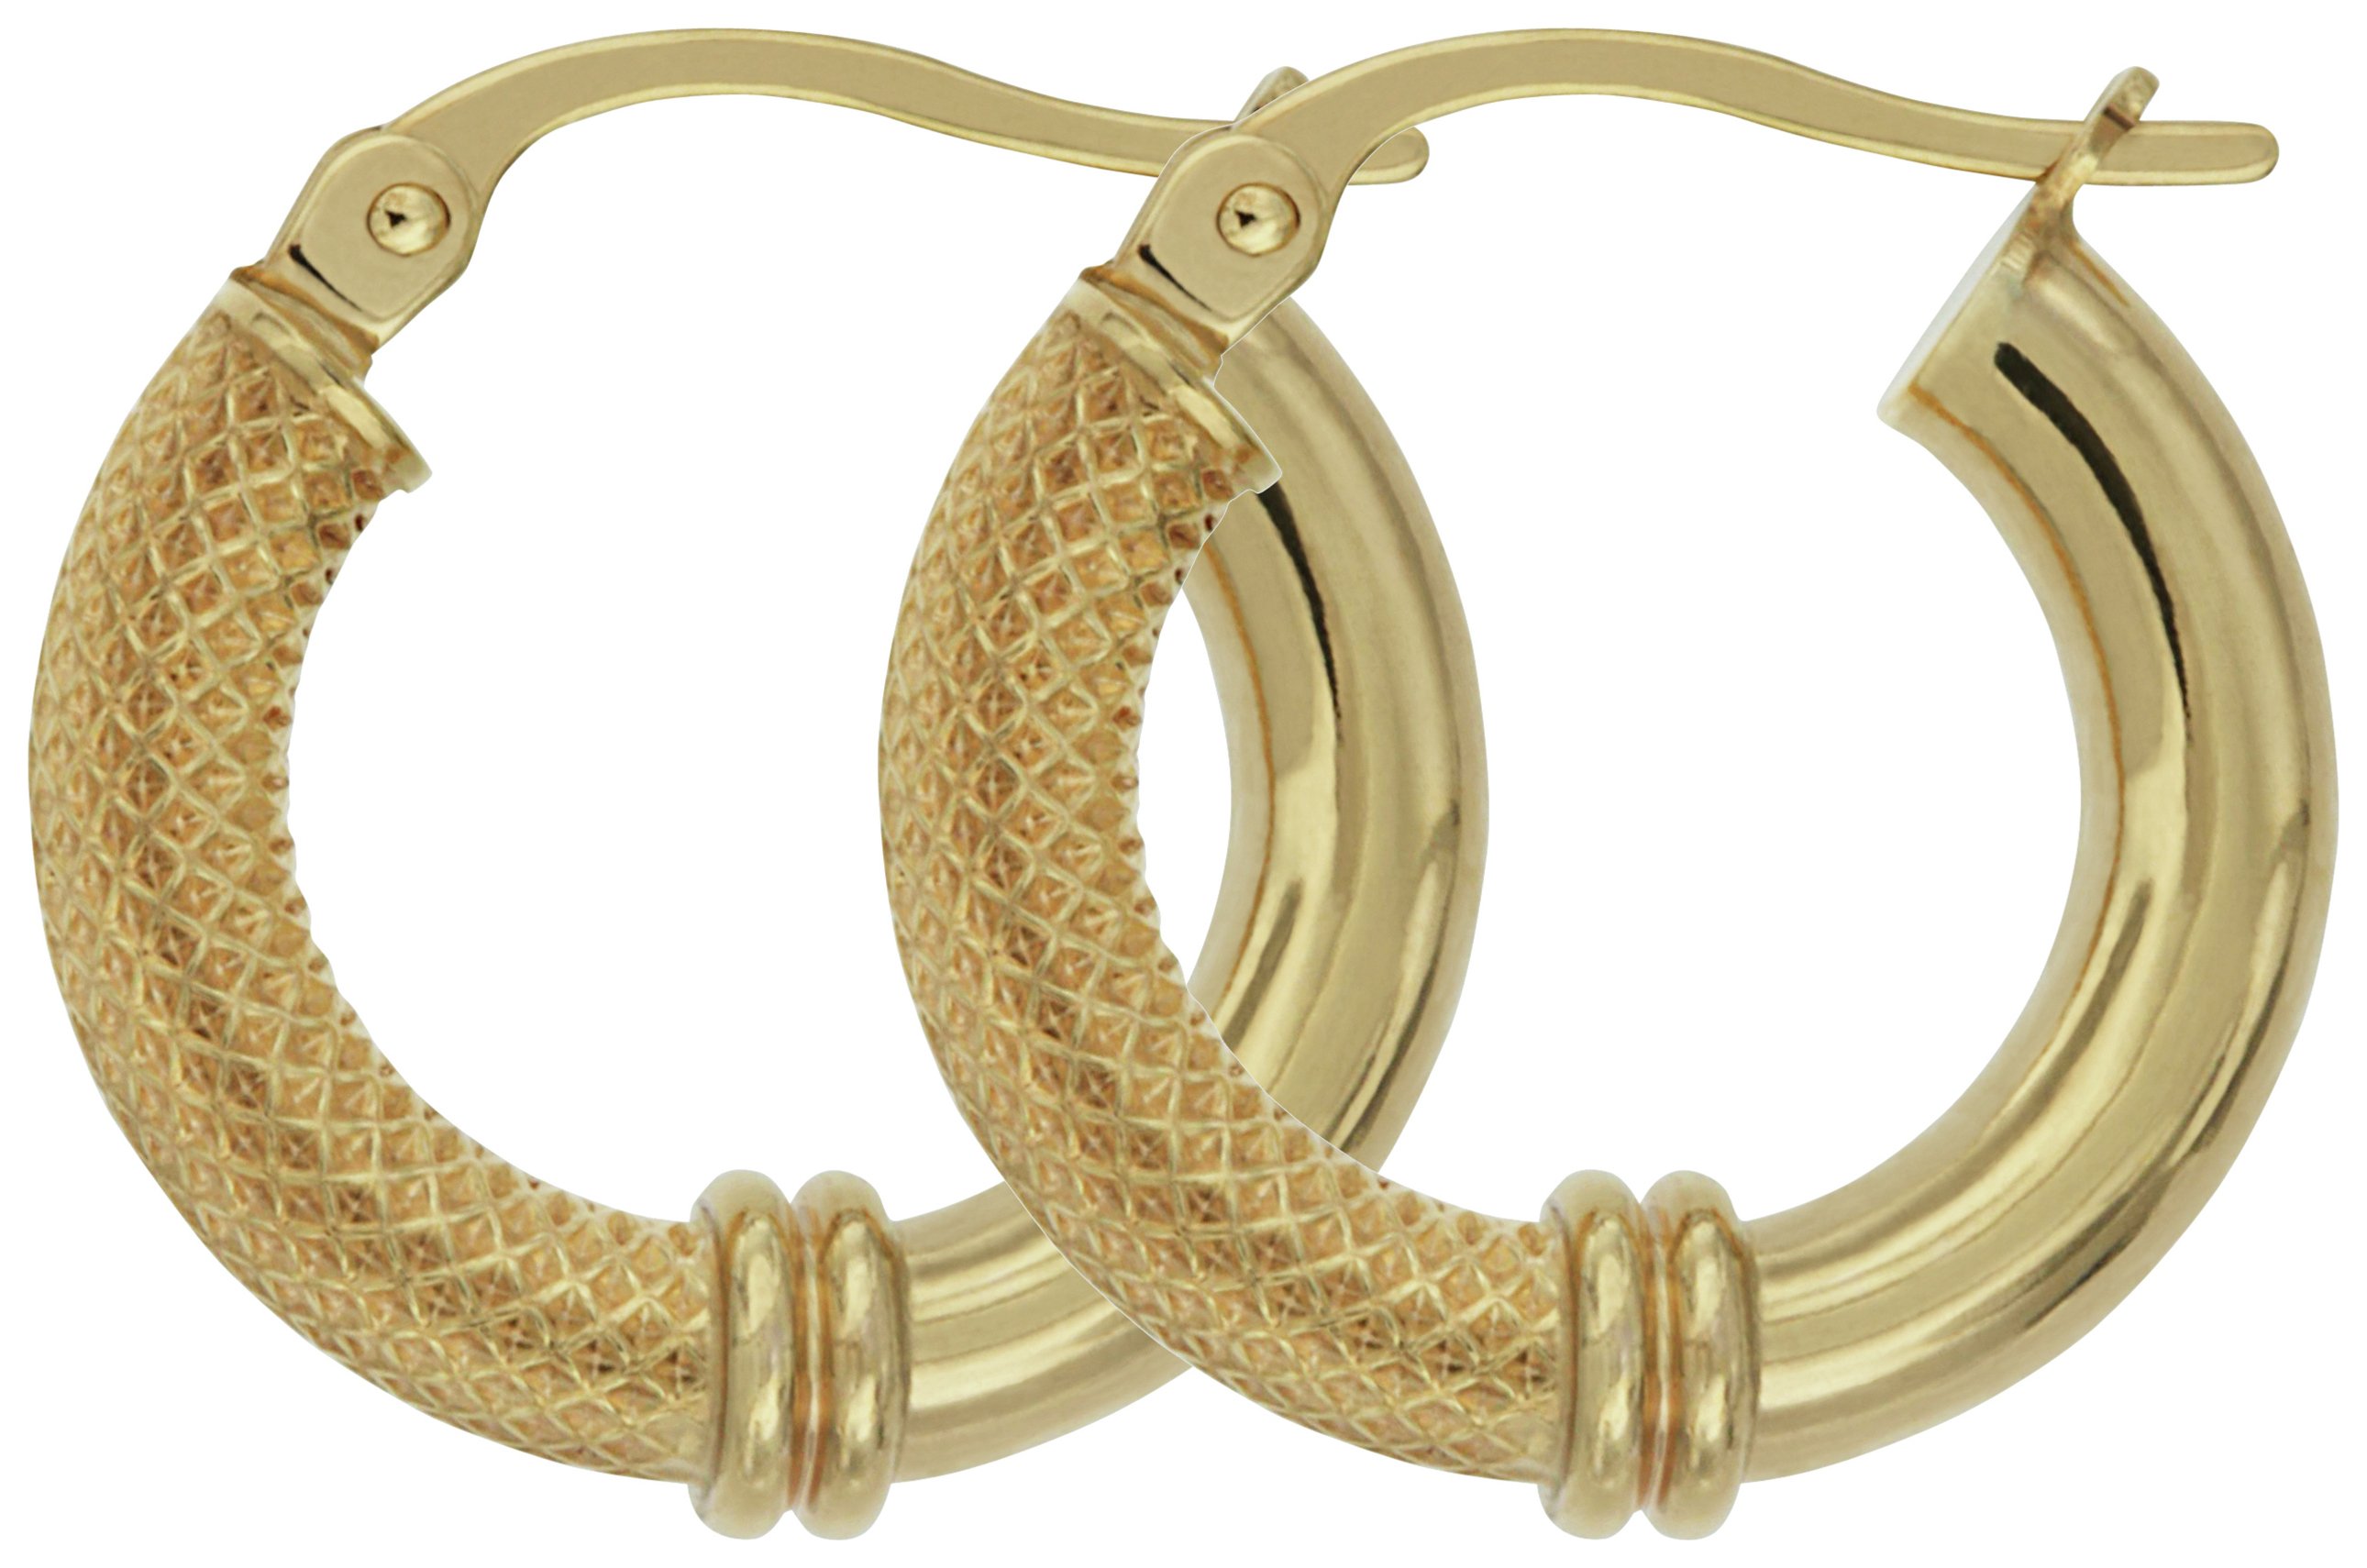 EAN 5055860300017 product image for Bracci 9ct Gold Textured Hoop Earrings | upcitemdb.com